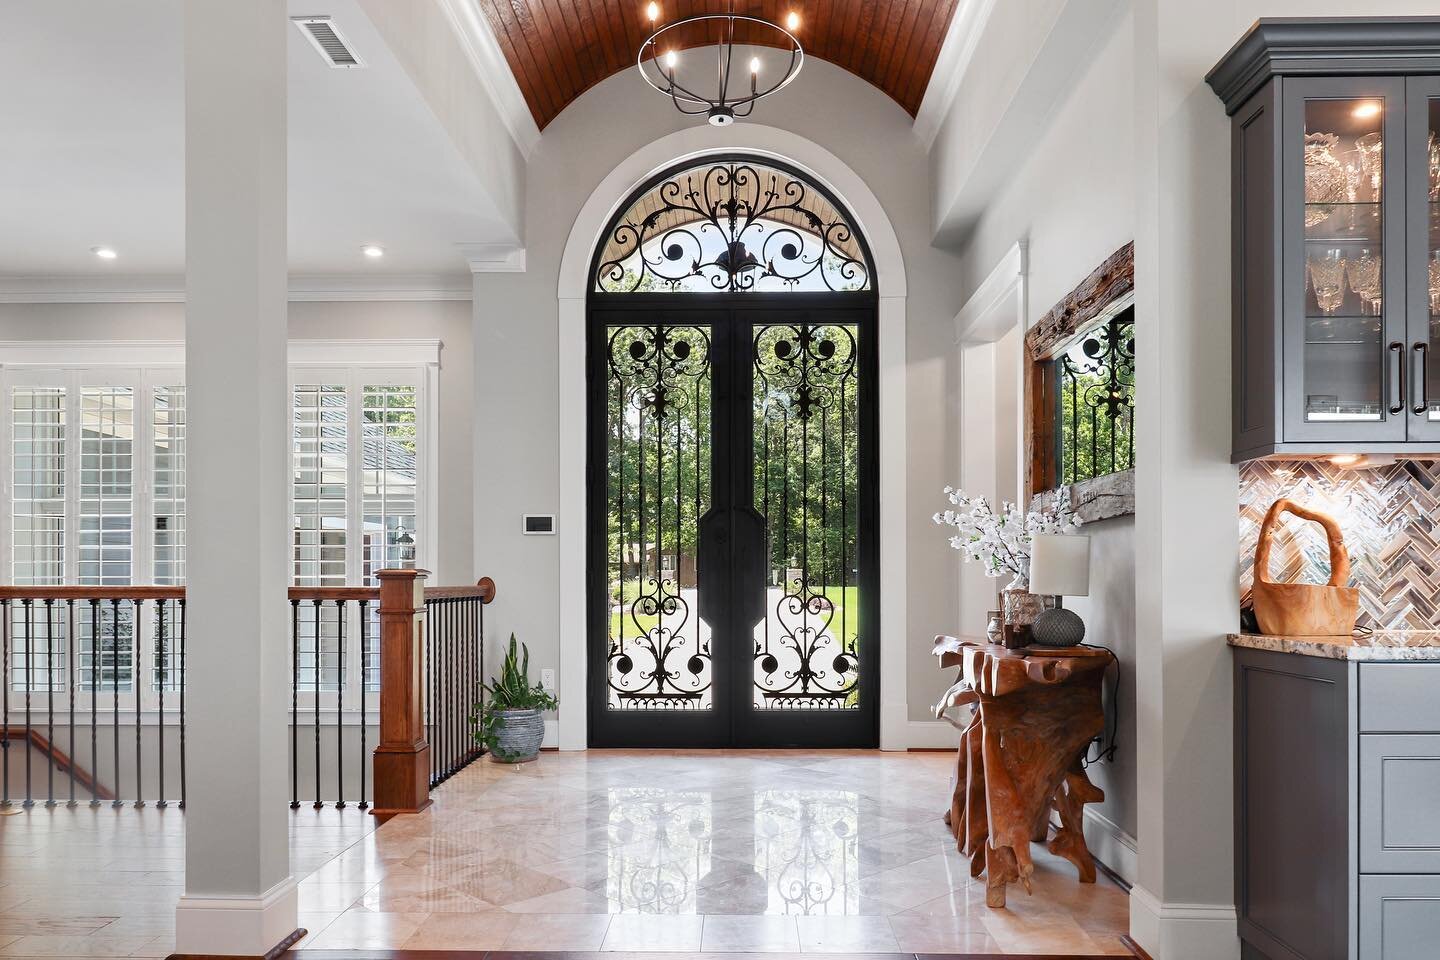 Check out all the details in the picture perfect entrance.
✅custom door
✅marble floor tiles
✅barrel stained ceiling 
✅chandelier 

Fun calibration with @tabdesigns.interiors